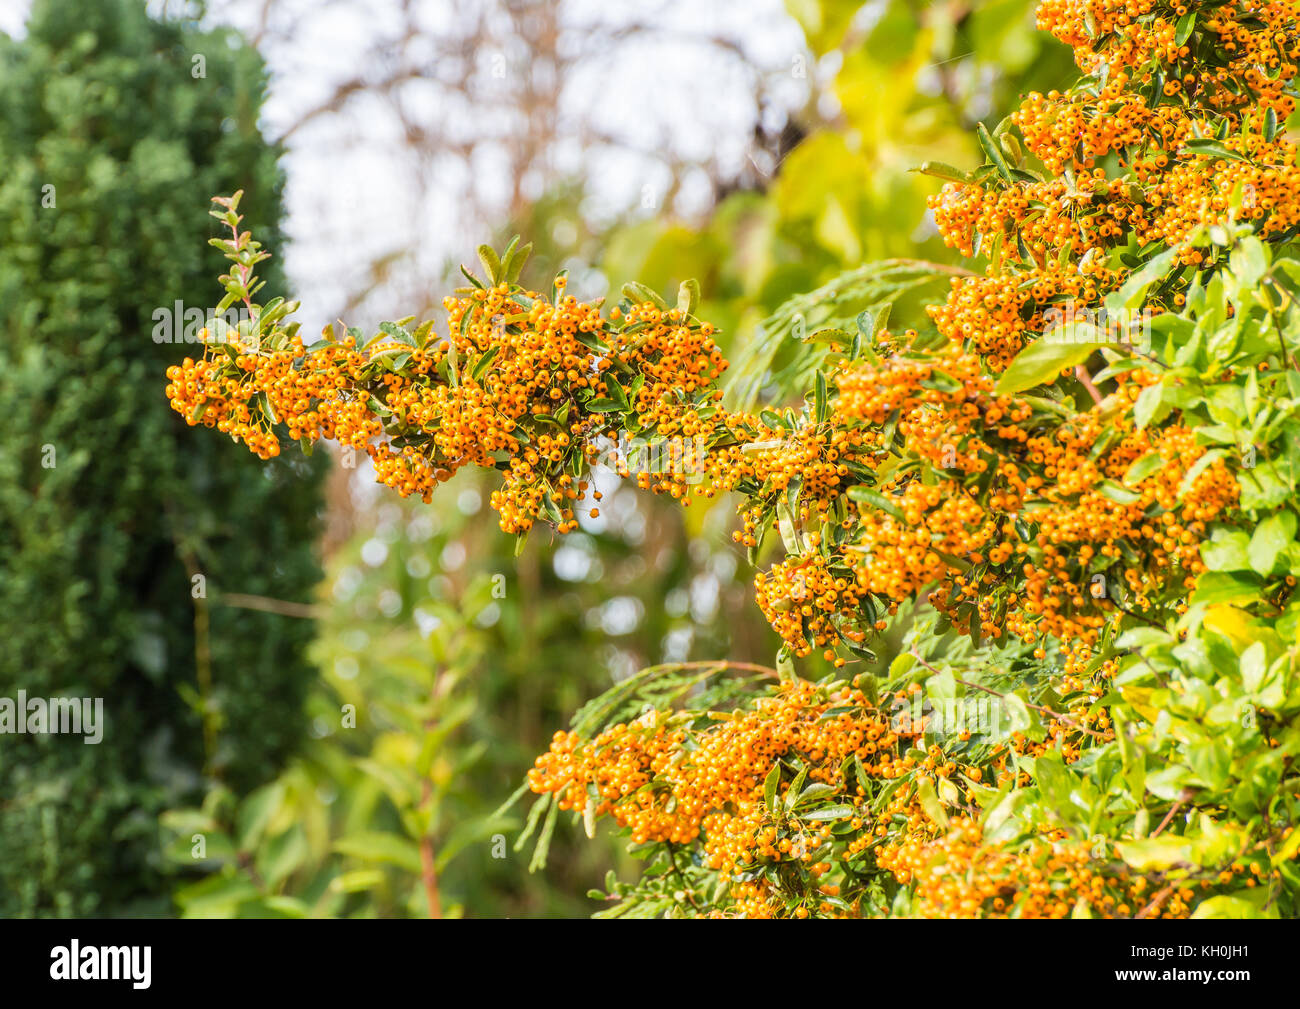 A shot of a mass of pyracantha berries. Stock Photo